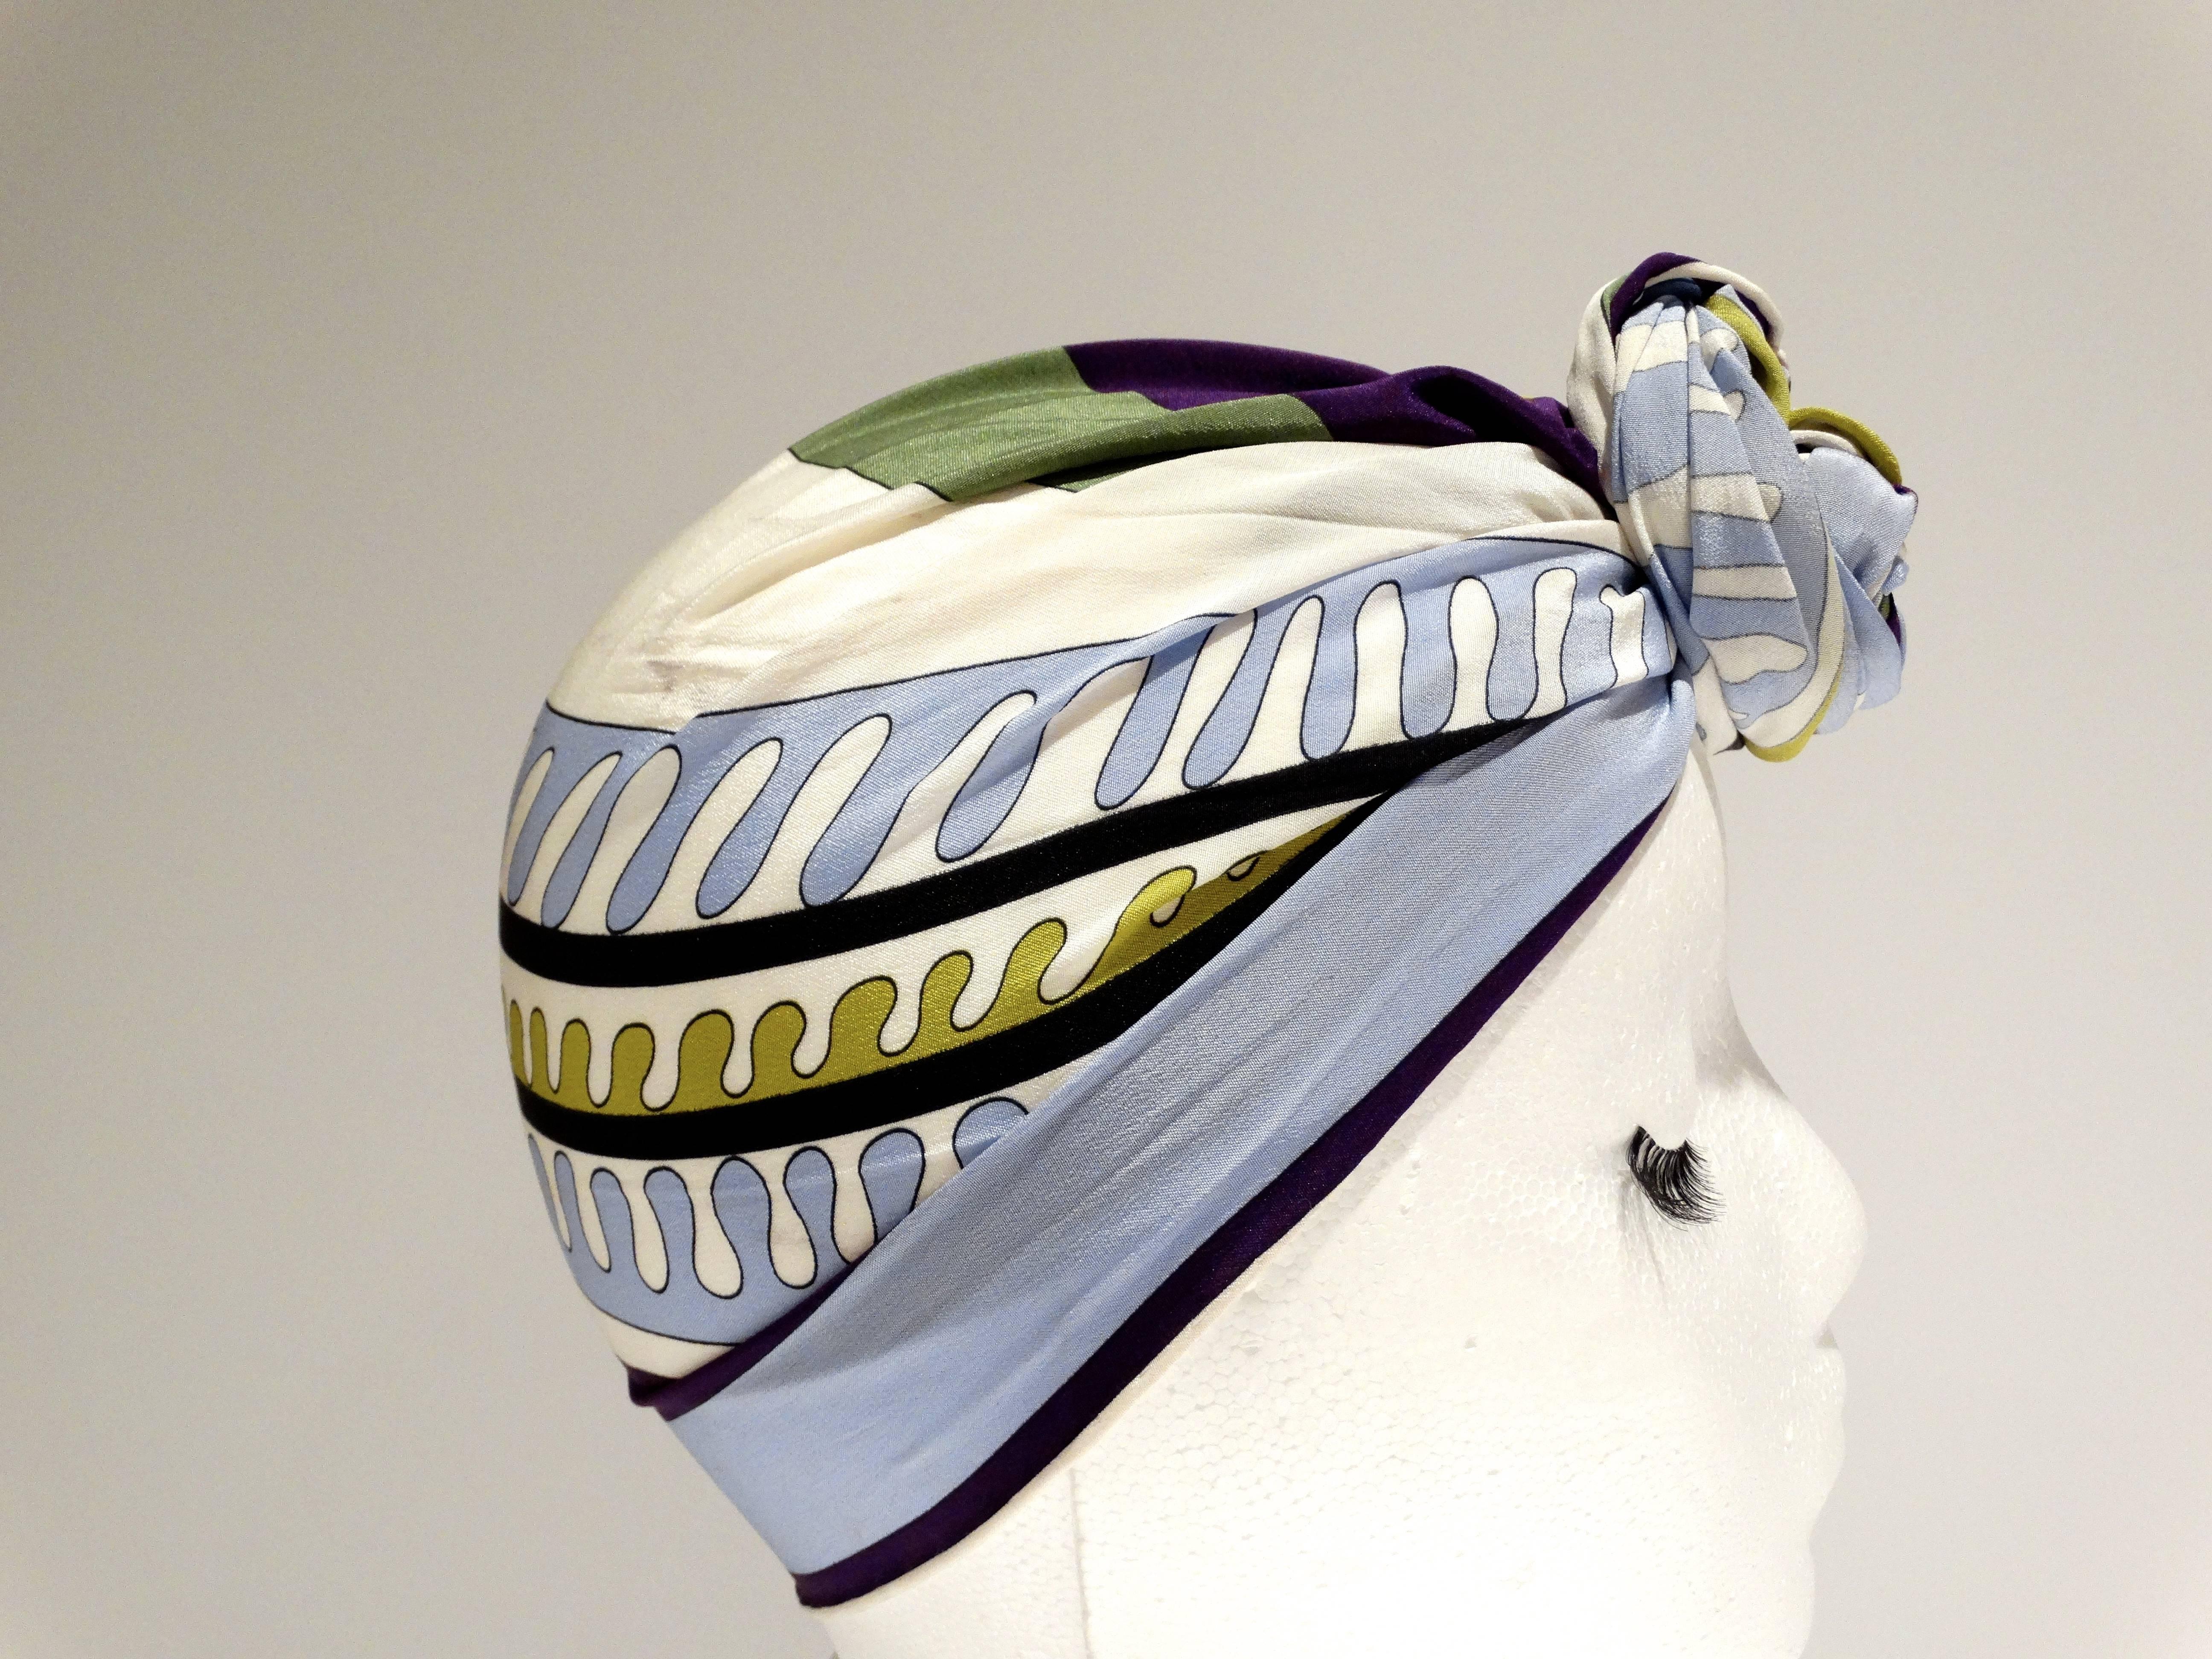 1990's Emilio Pucci rectangular silk scarf in a bold geometric print. Colors are white, black, sky blue, greens and deep purple. Hand rolled and hand stitched edges. Measures 48 x 8.6 inches great for wrapping (shown in images) signed Emilio through